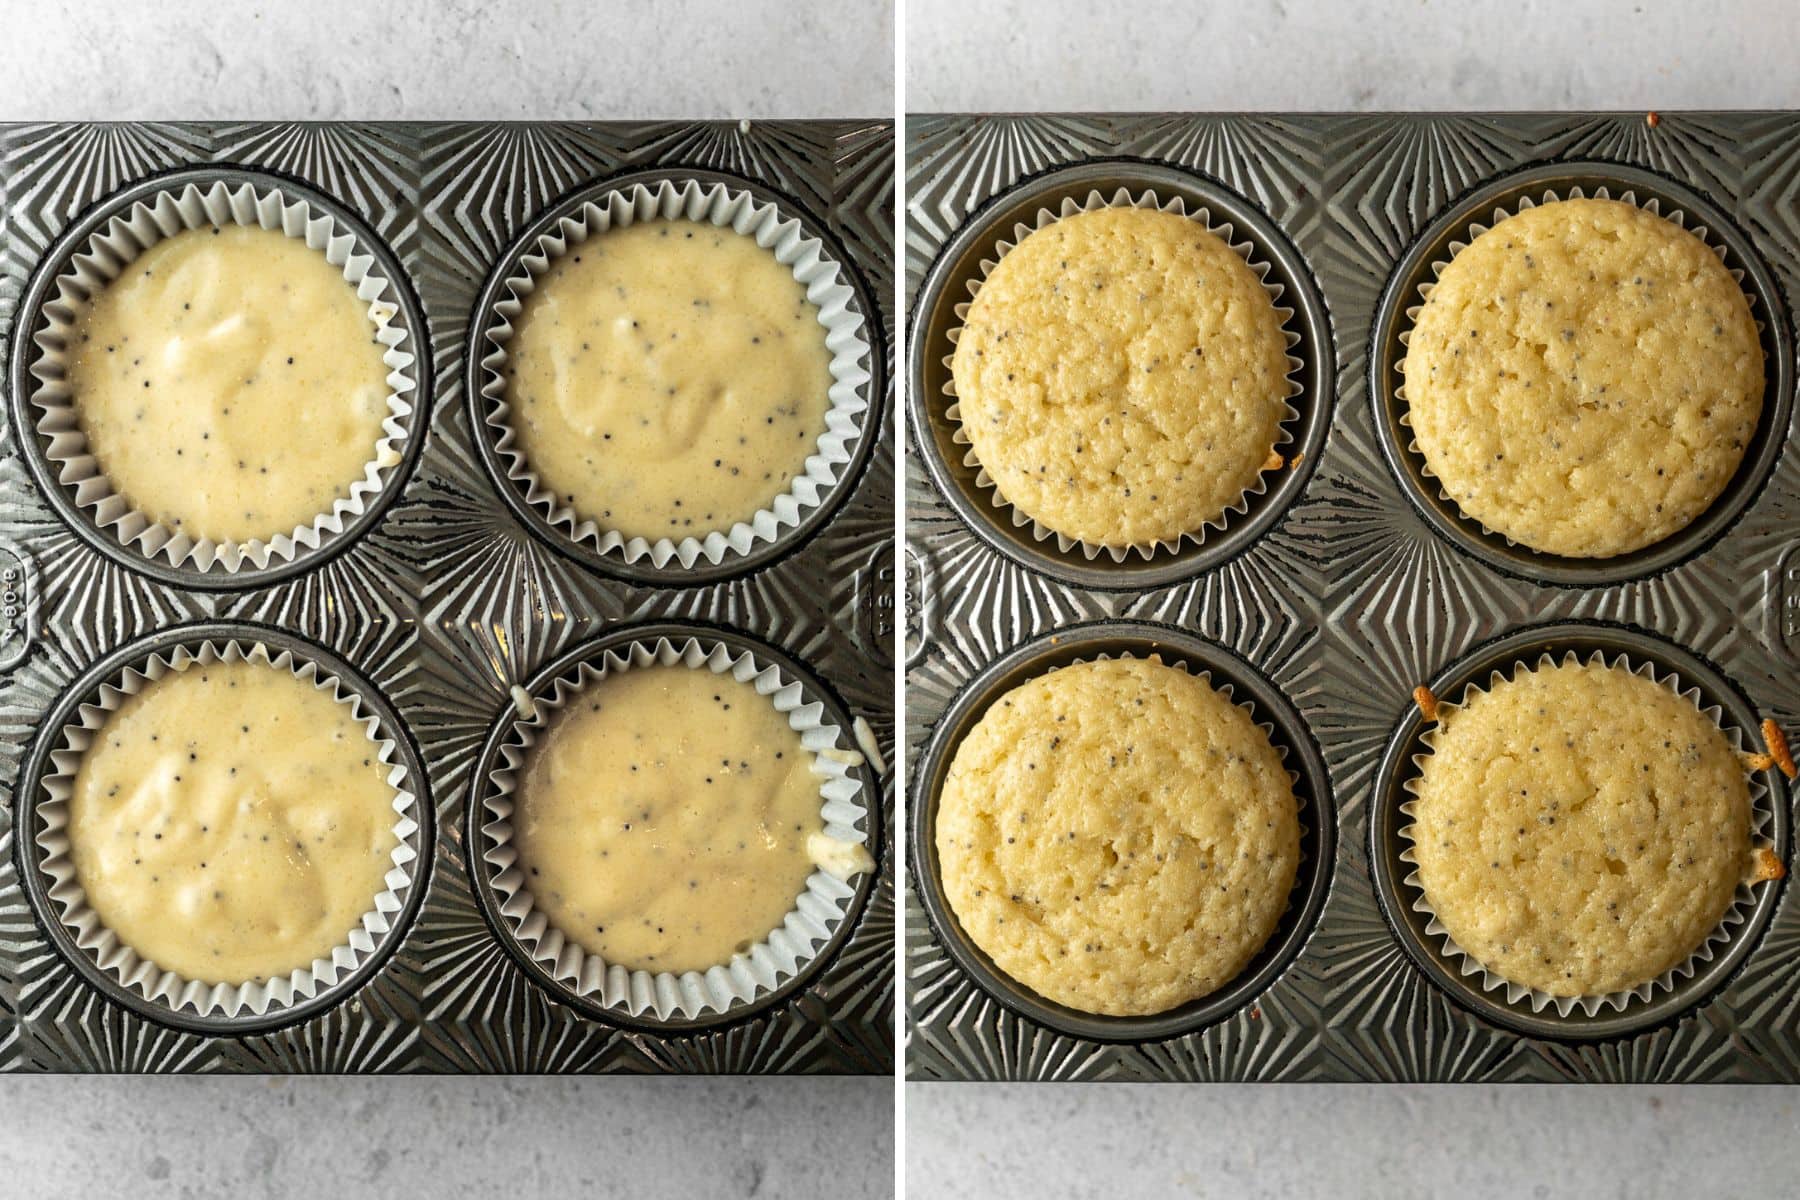 A collage of unbaked batter in a muffin tin and then baked lemon poppyseed cupcakes.